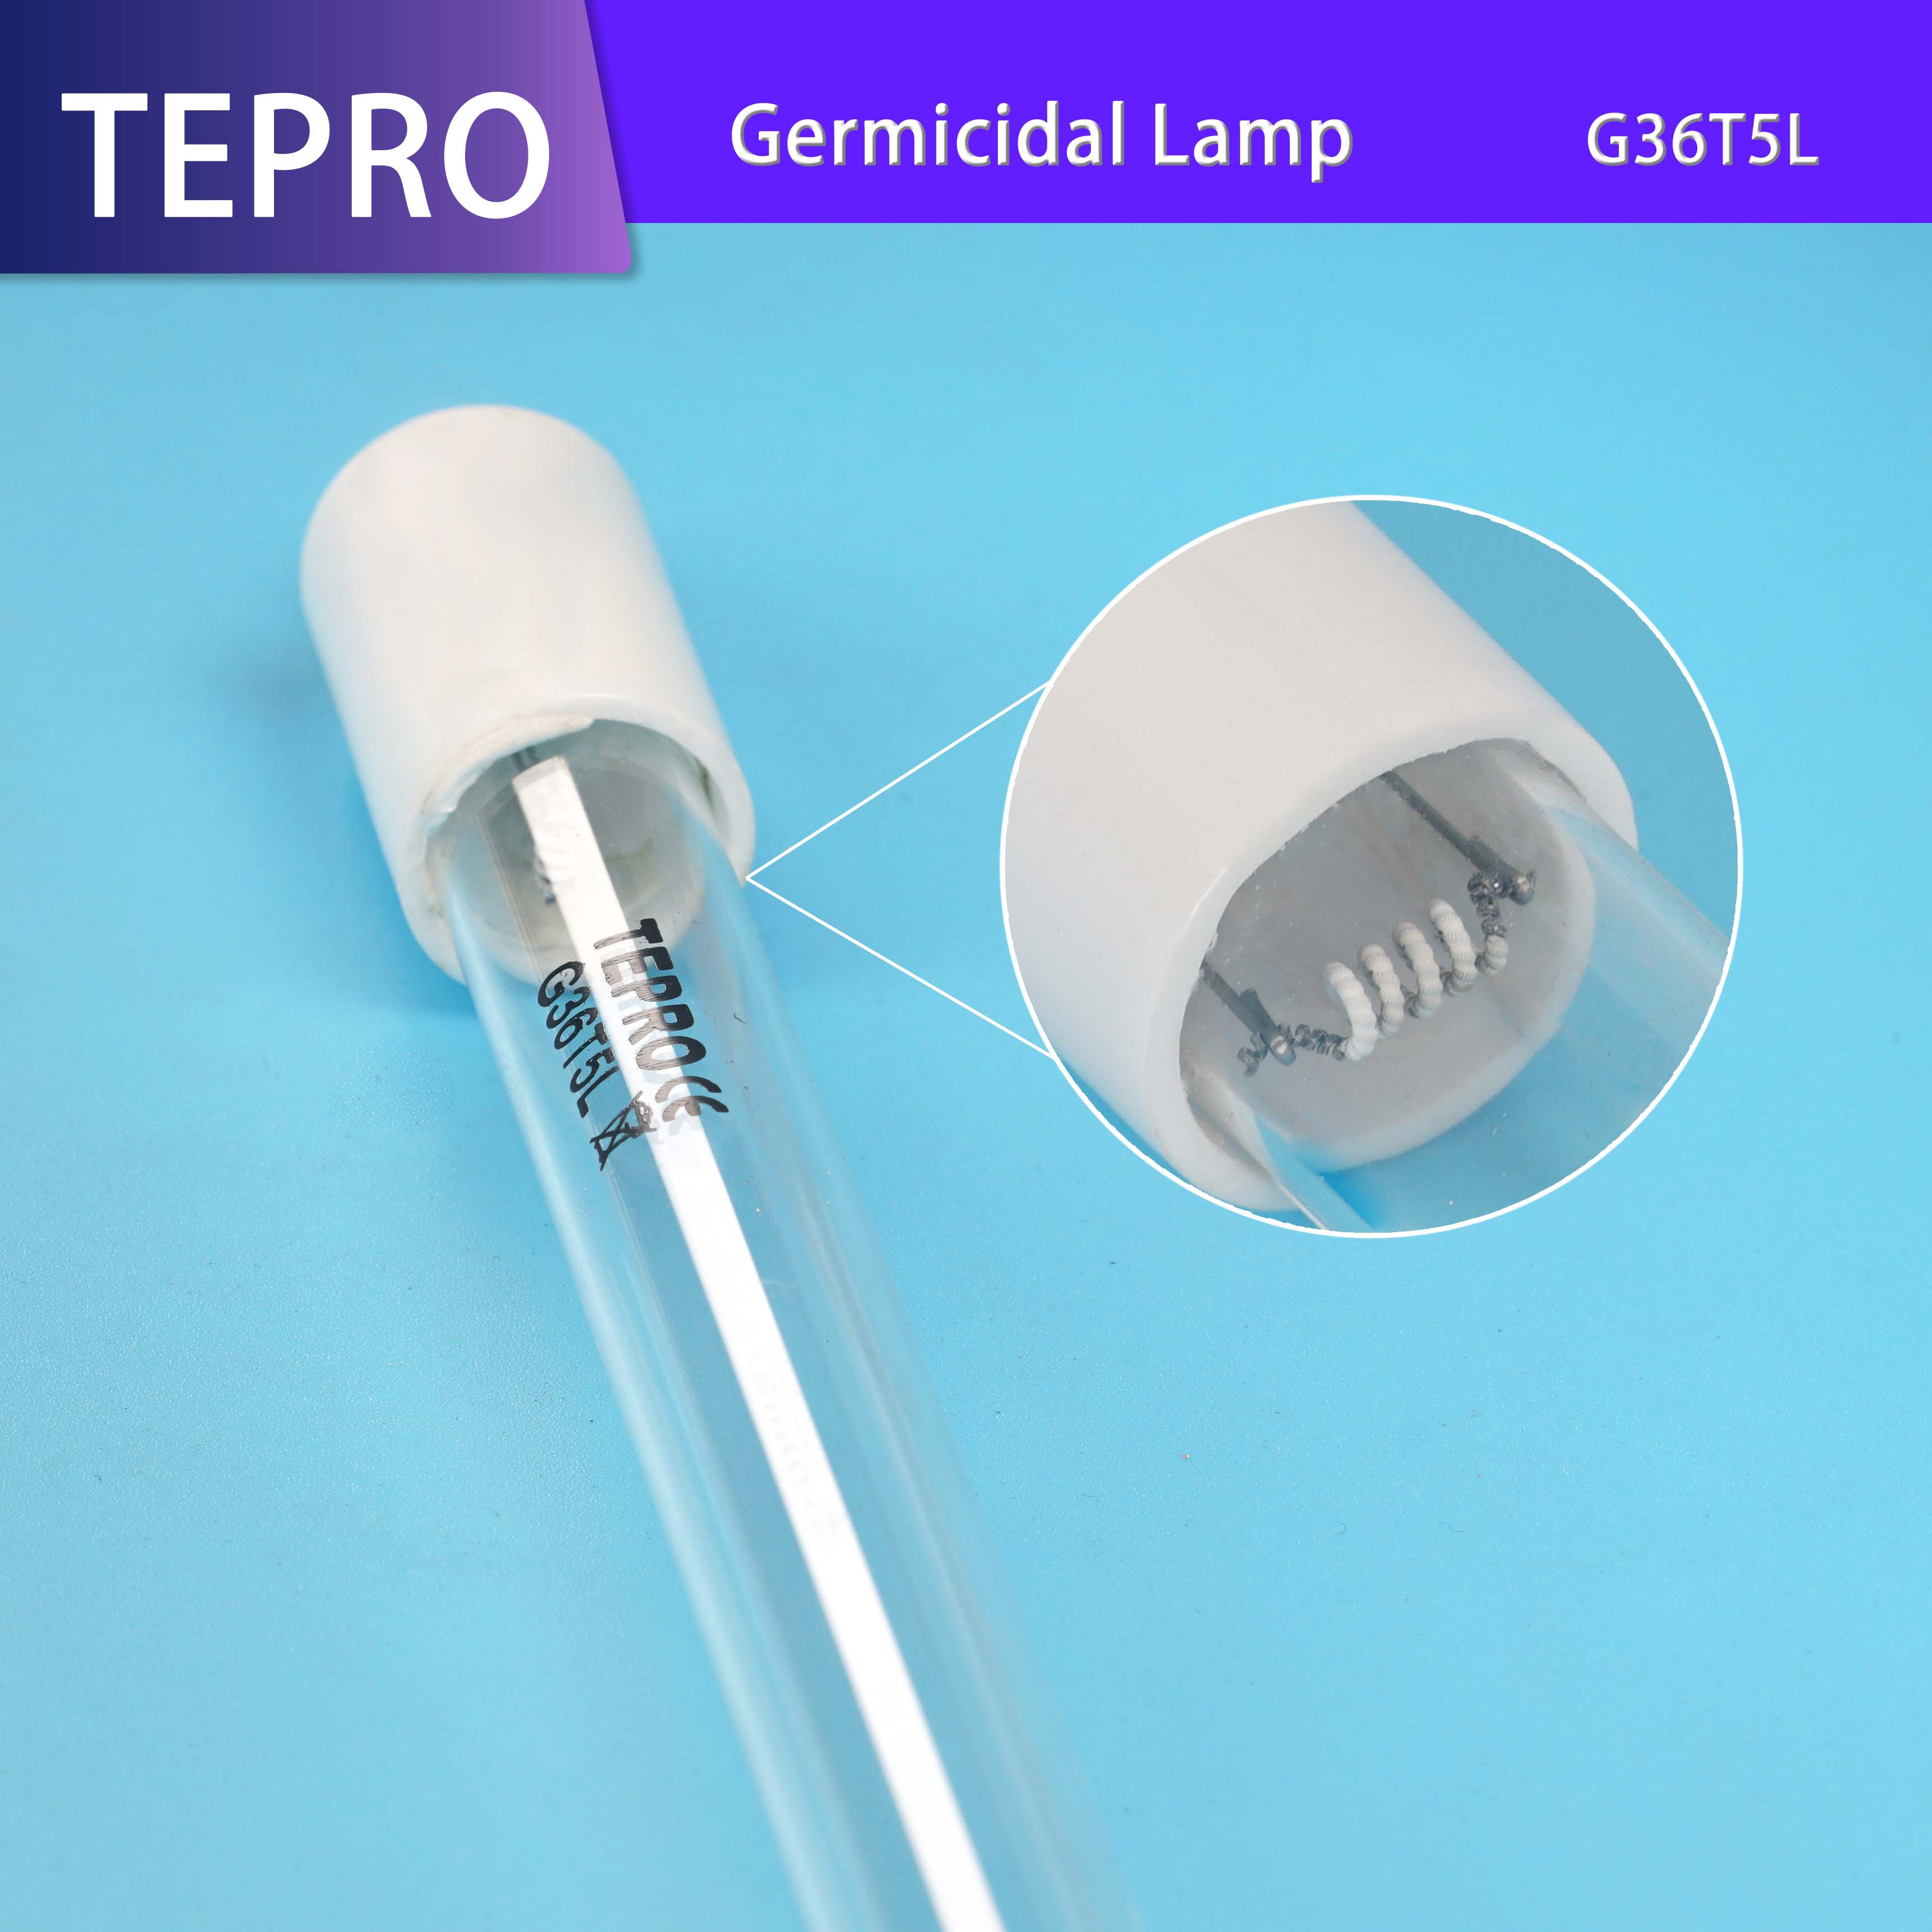 news-quality gel lamp design for reptiles-Tepro-img